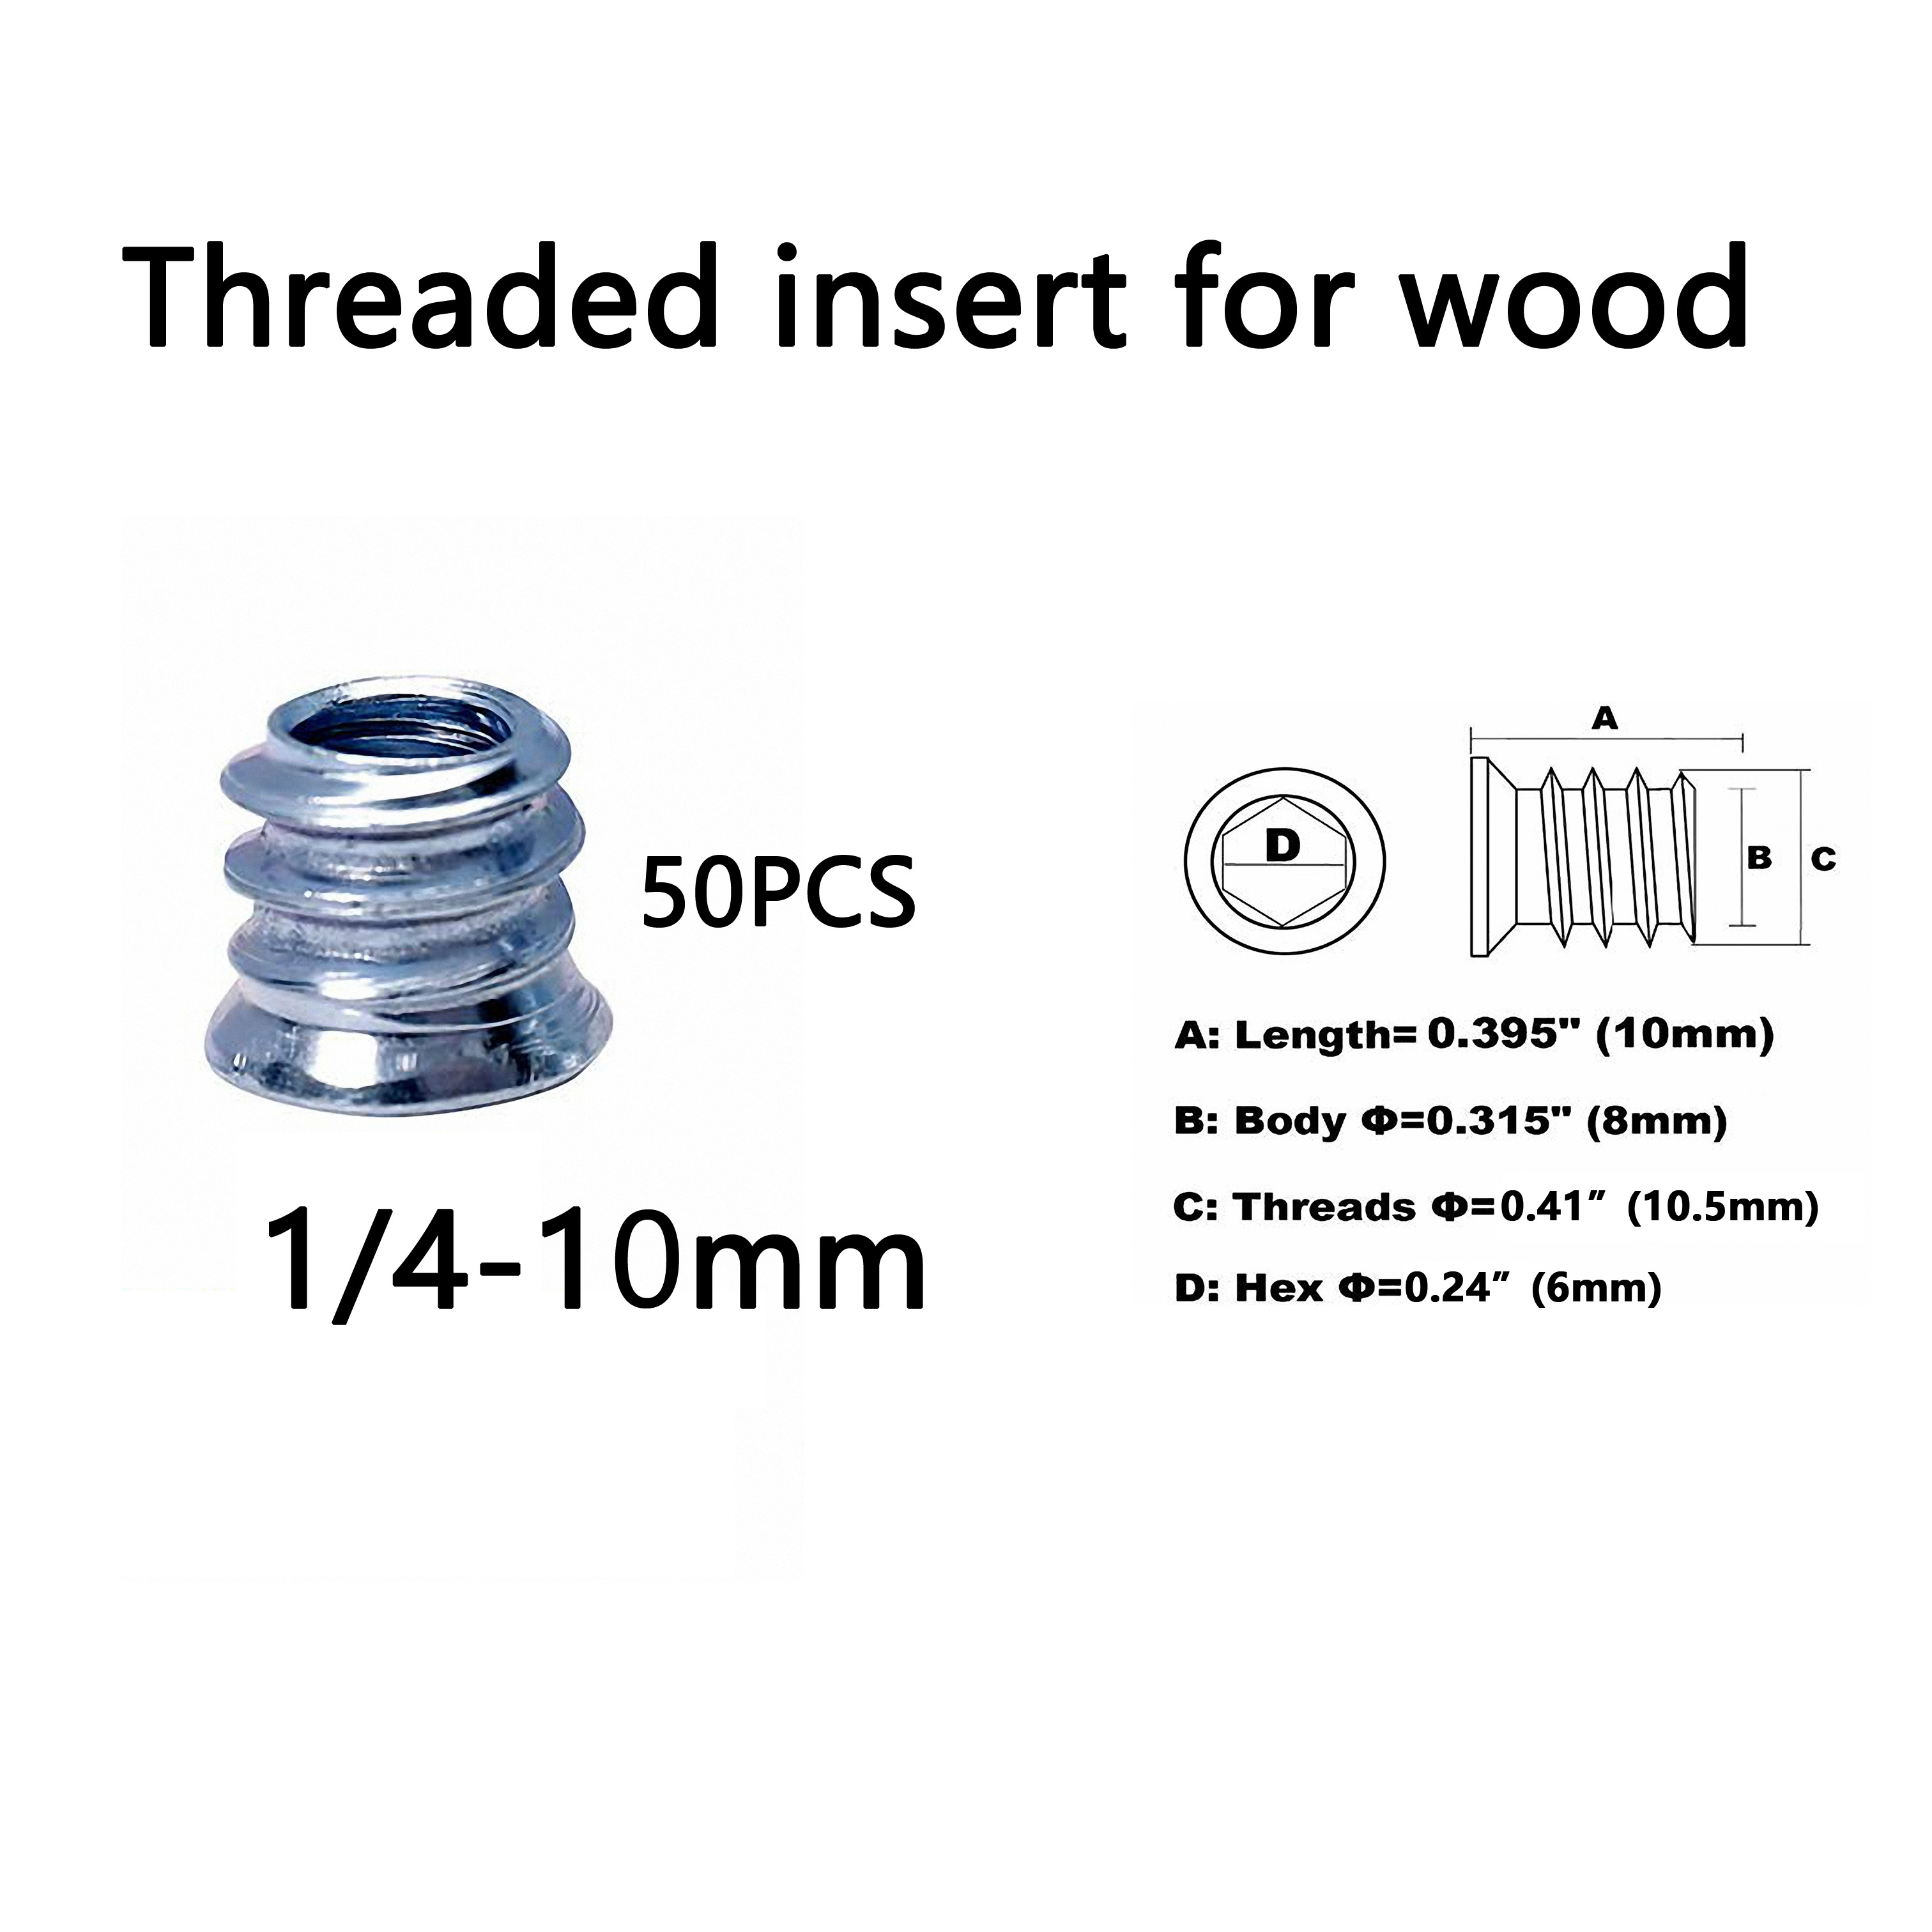 50pcs Threaded Inserts For Wood, Screw In Nut Insert Nutsert For Wood  Furniture